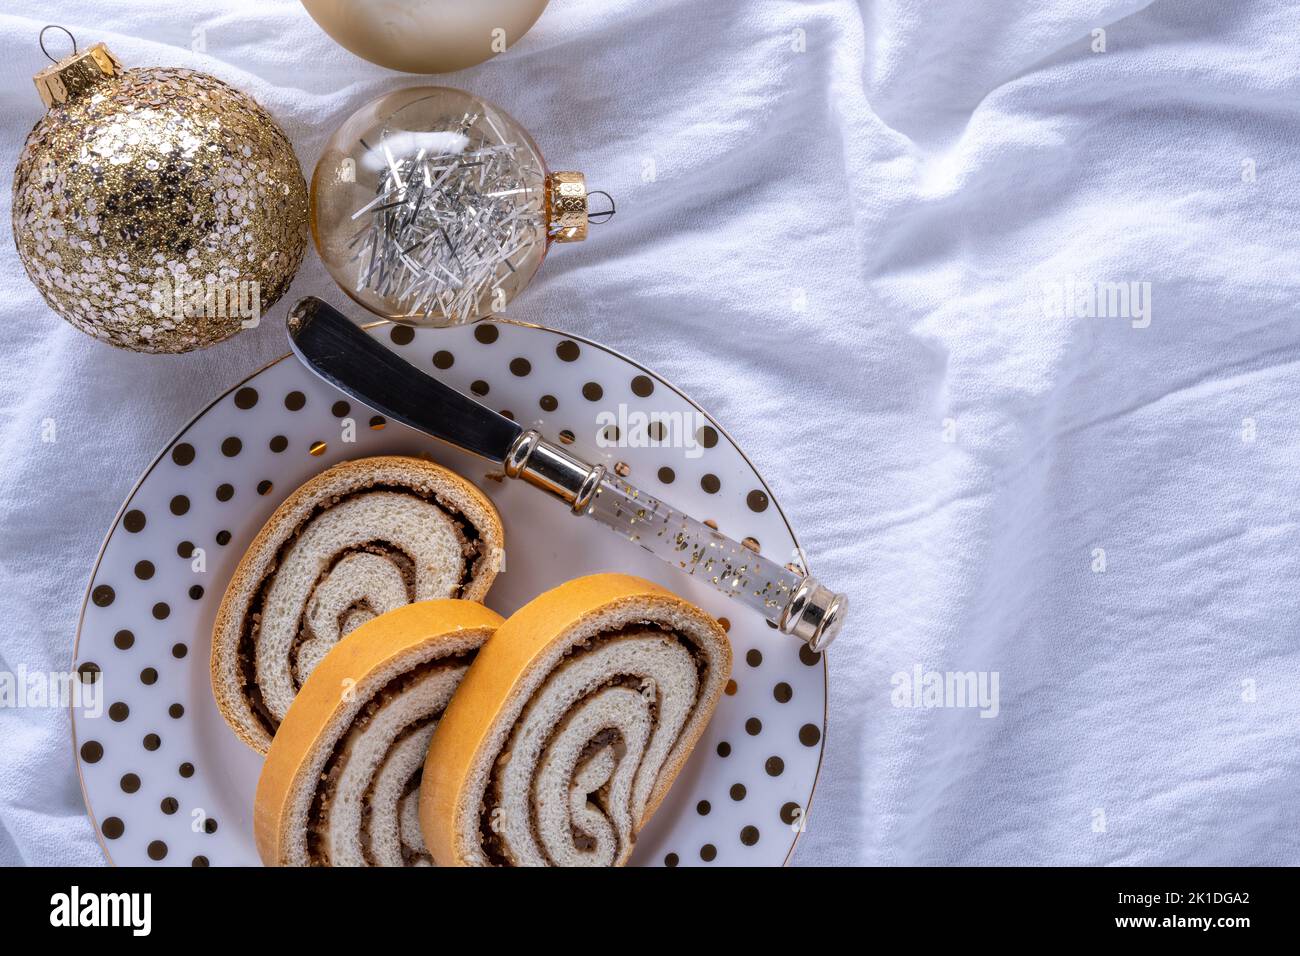 festive holiday dessert background with nut roll on a plate, spreader, and sparkly ball ornaments Stock Photo